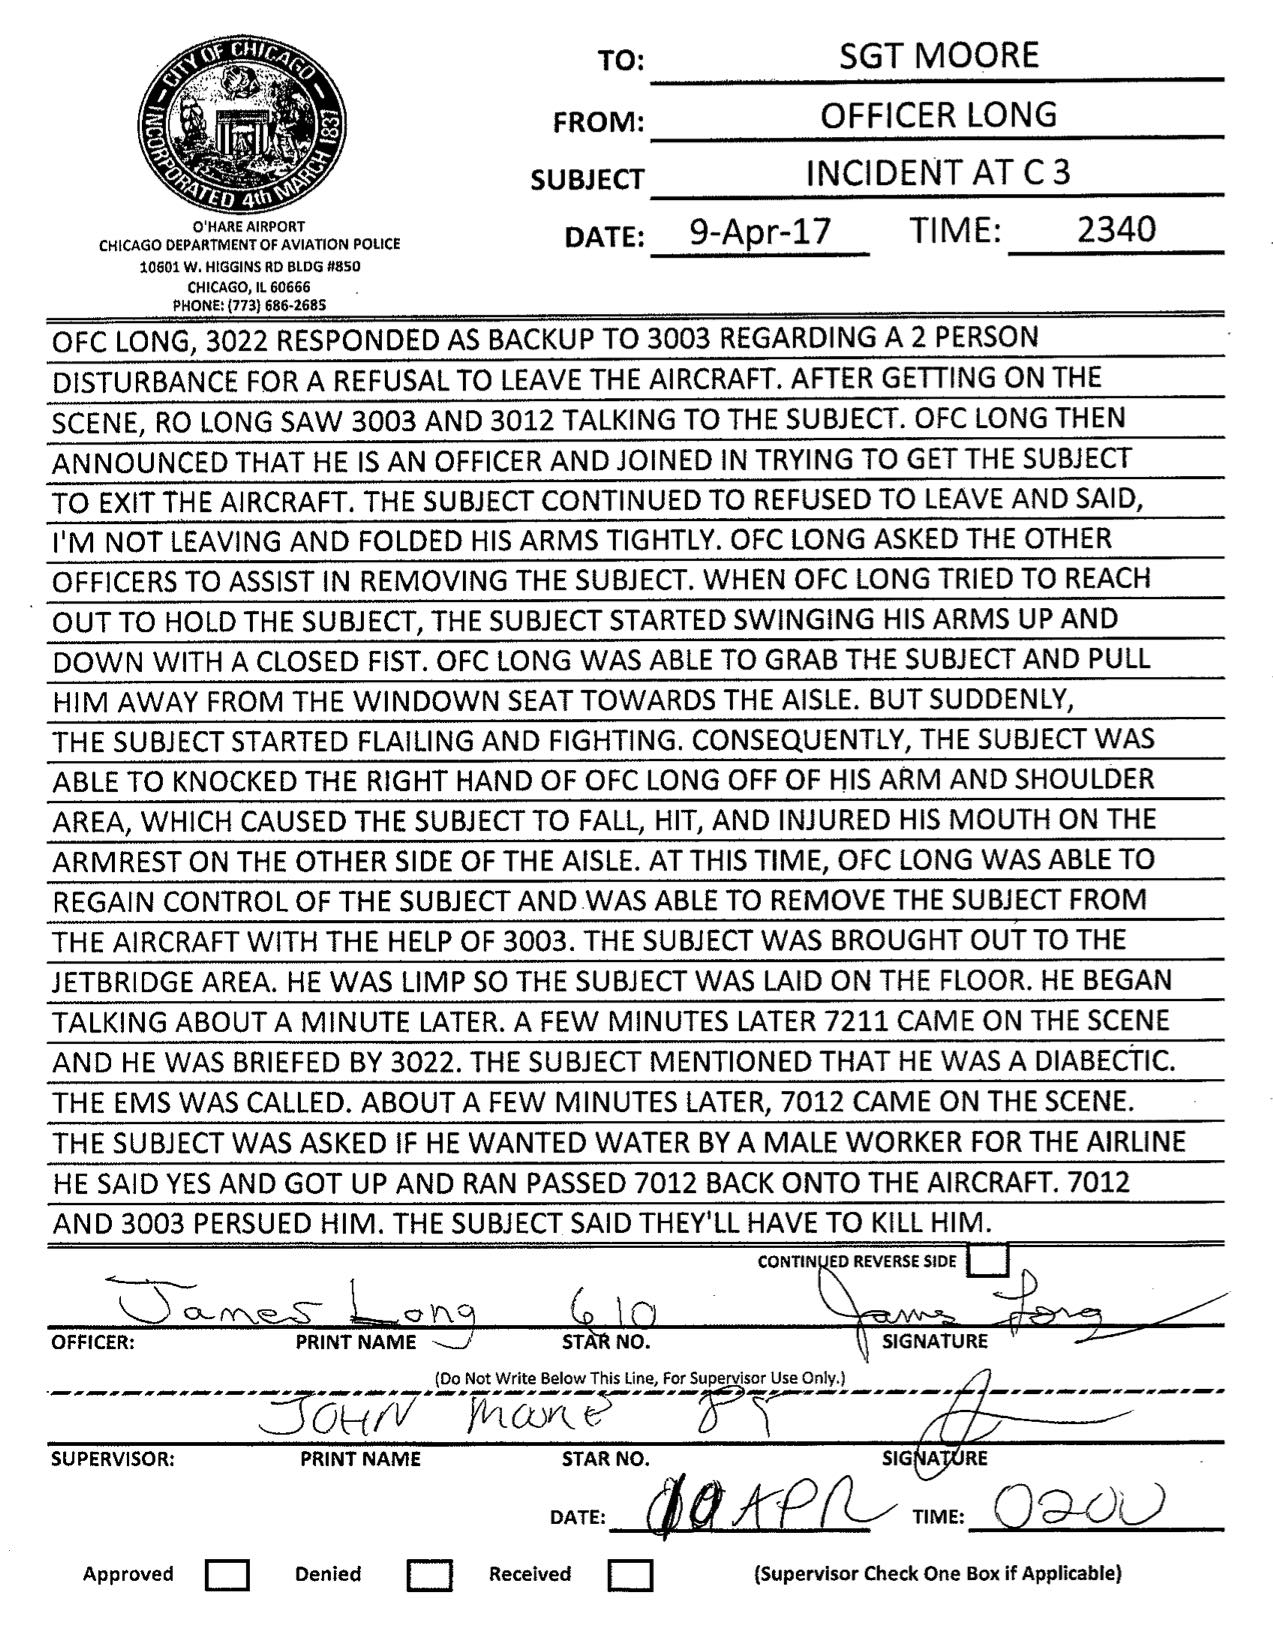 Chicago-Aviation-Police-incident-report G